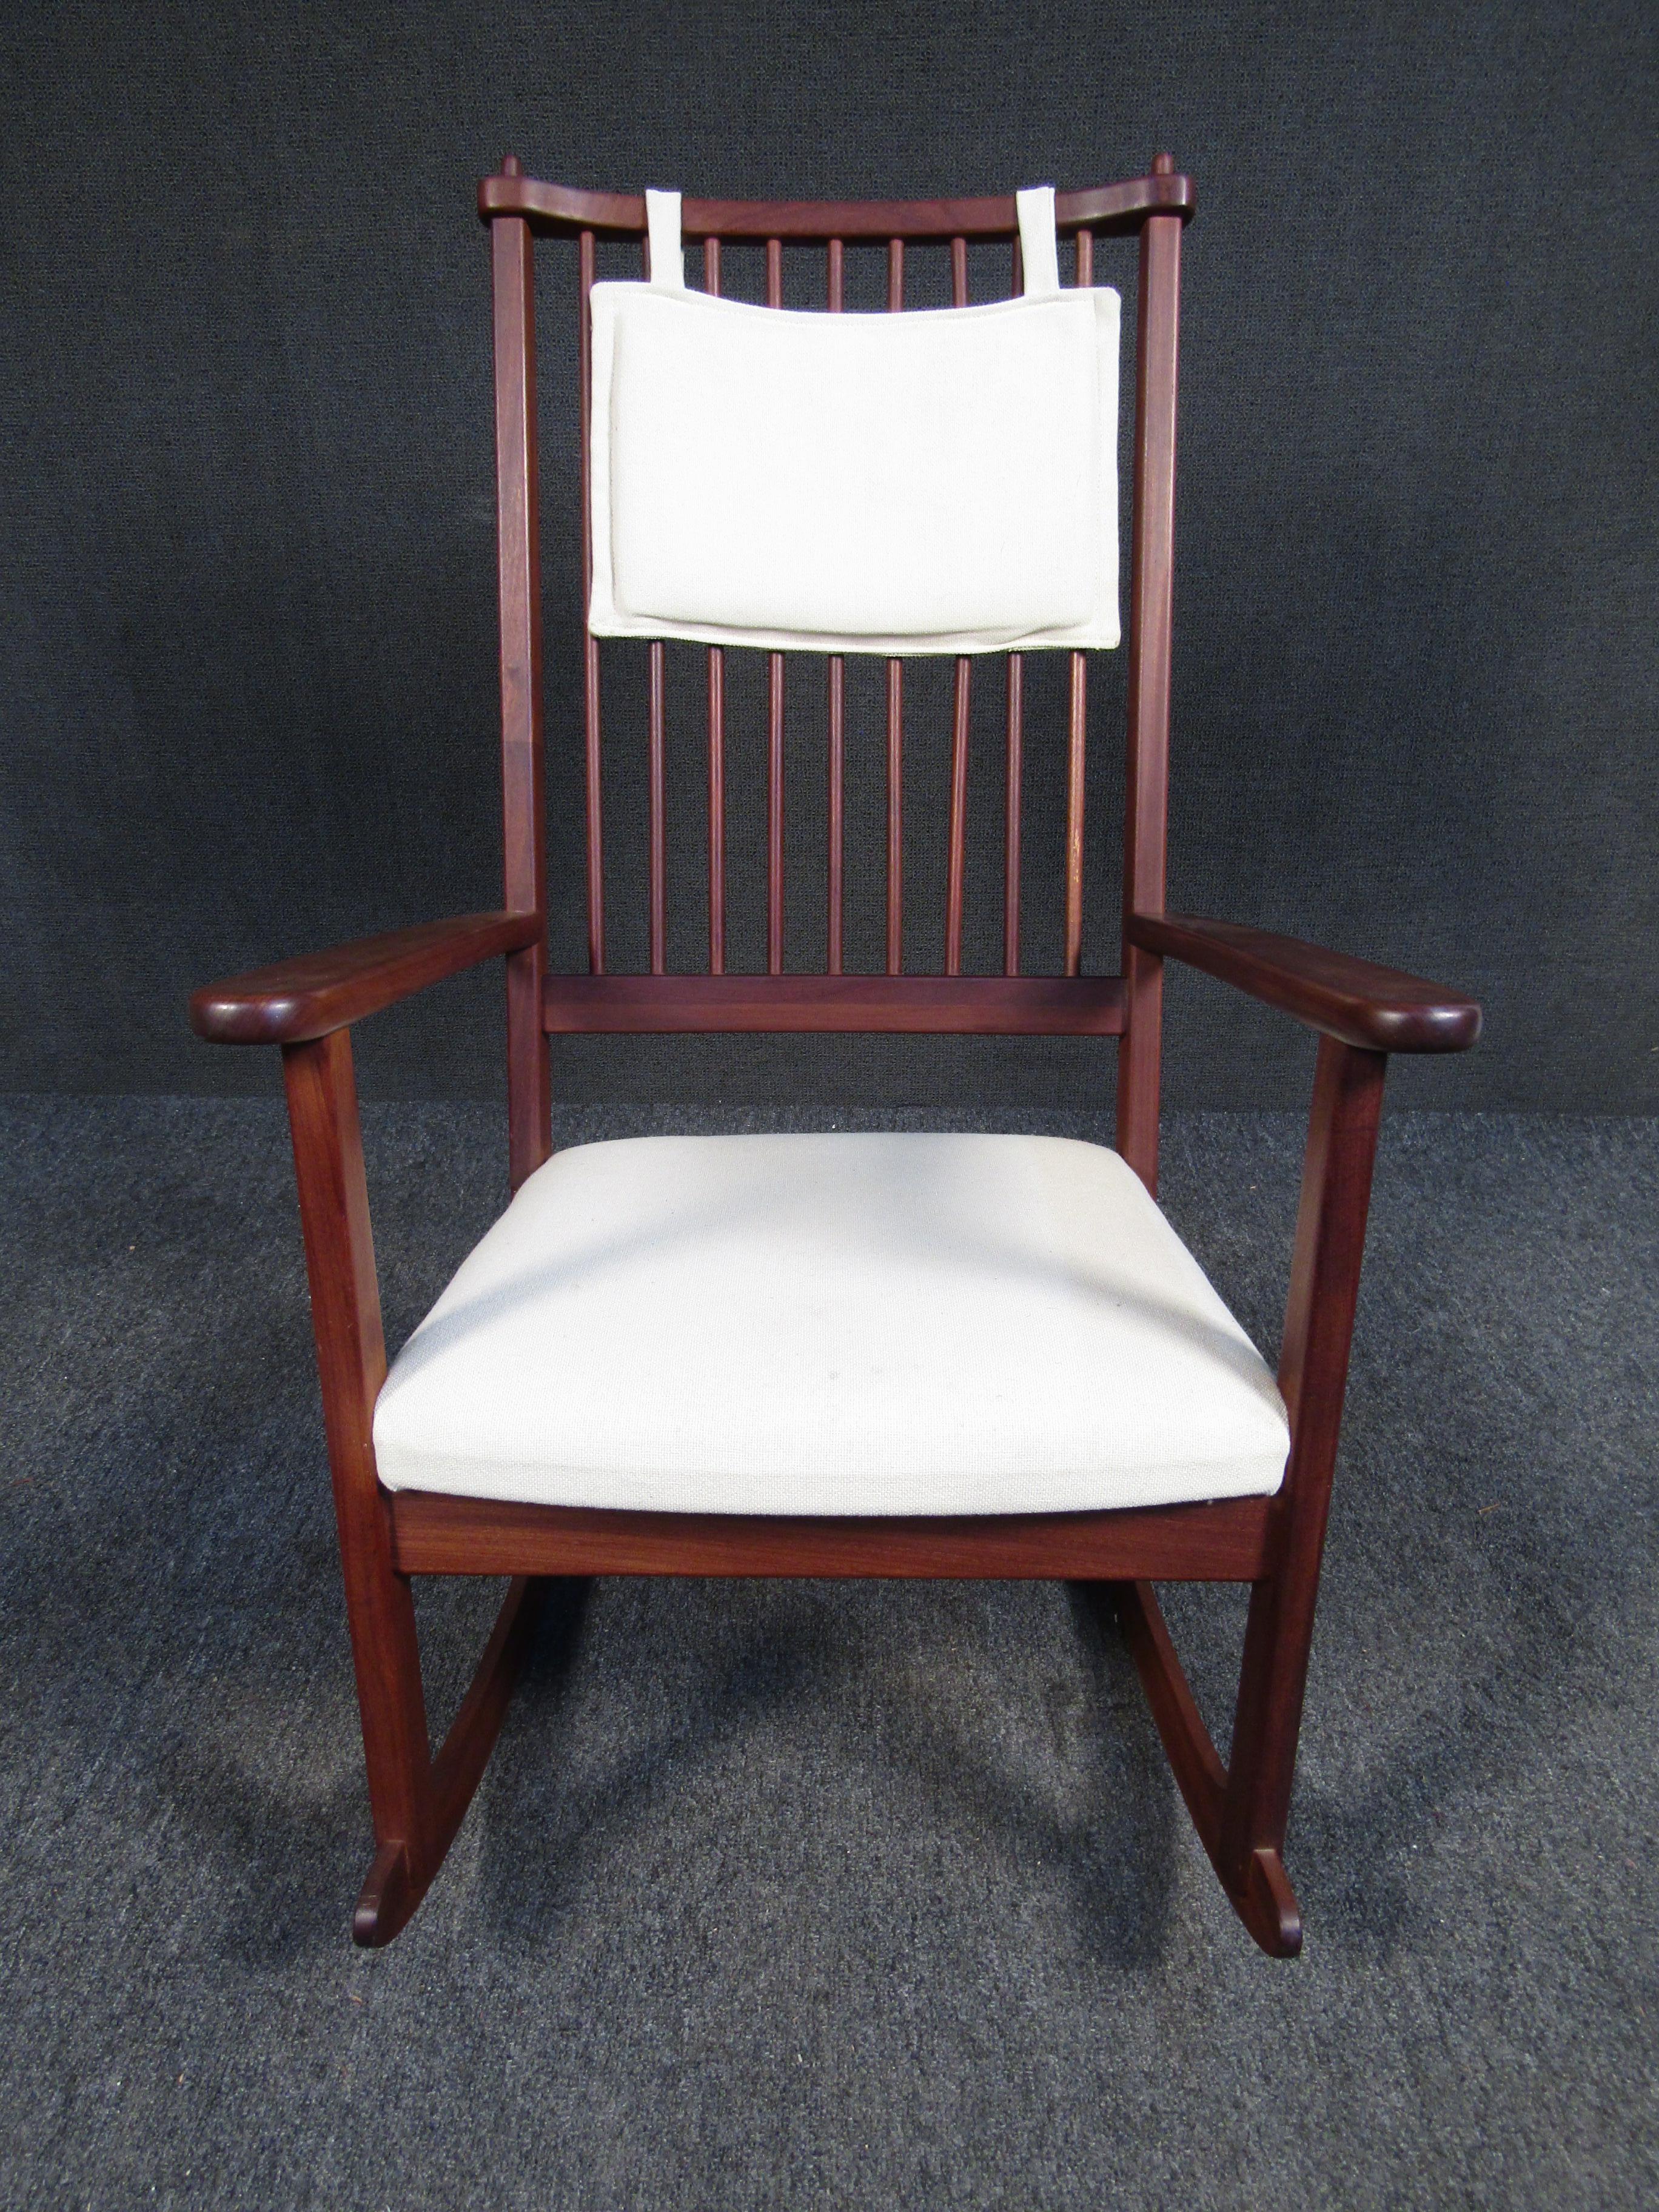 With dark and rich teak wood grain, timeless design, and contrasting light colored upholstery, this vintage rocking chair is a stylish way to add Mid-Century Modern style to space.
Please confirm location NY or NJ